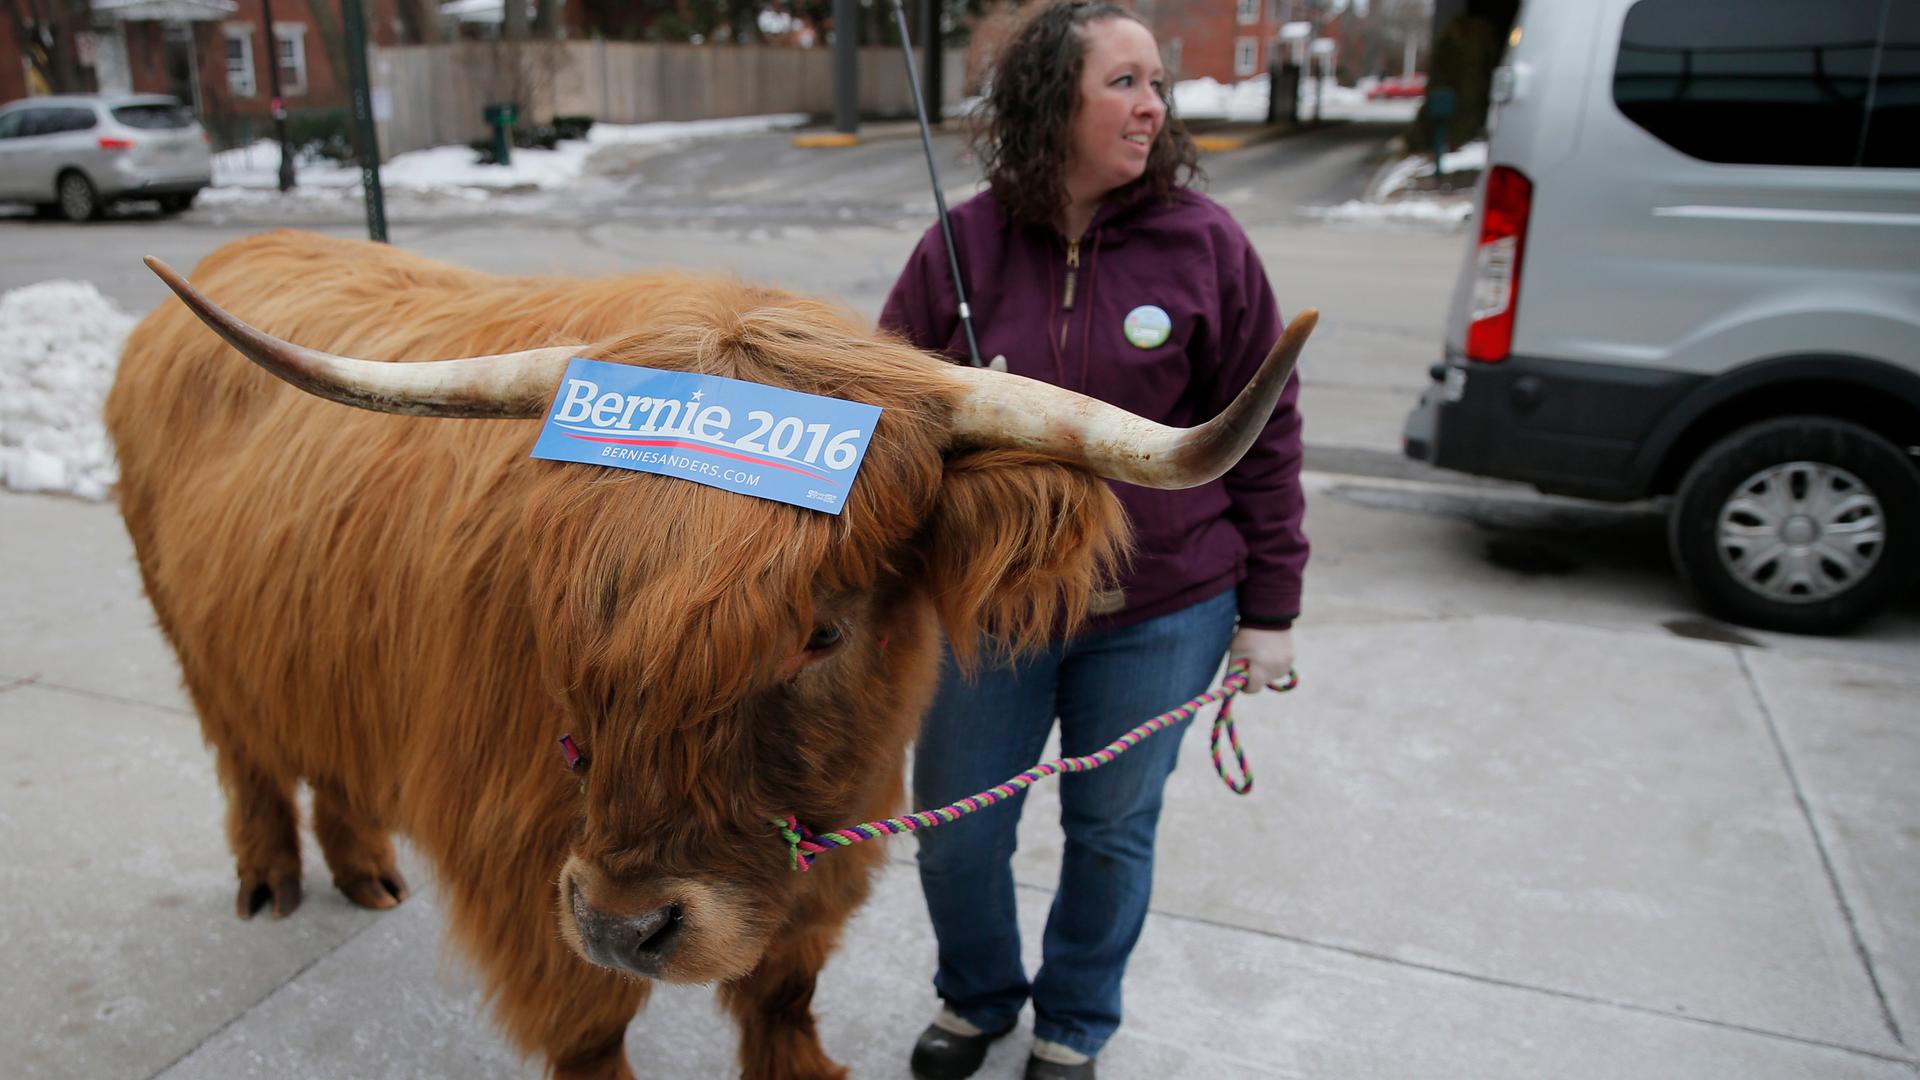 Real political bull. Or actually a steer called Bleu, with a political sticker, in downtown Manchester, New Hampshire, on the eve of the primary.